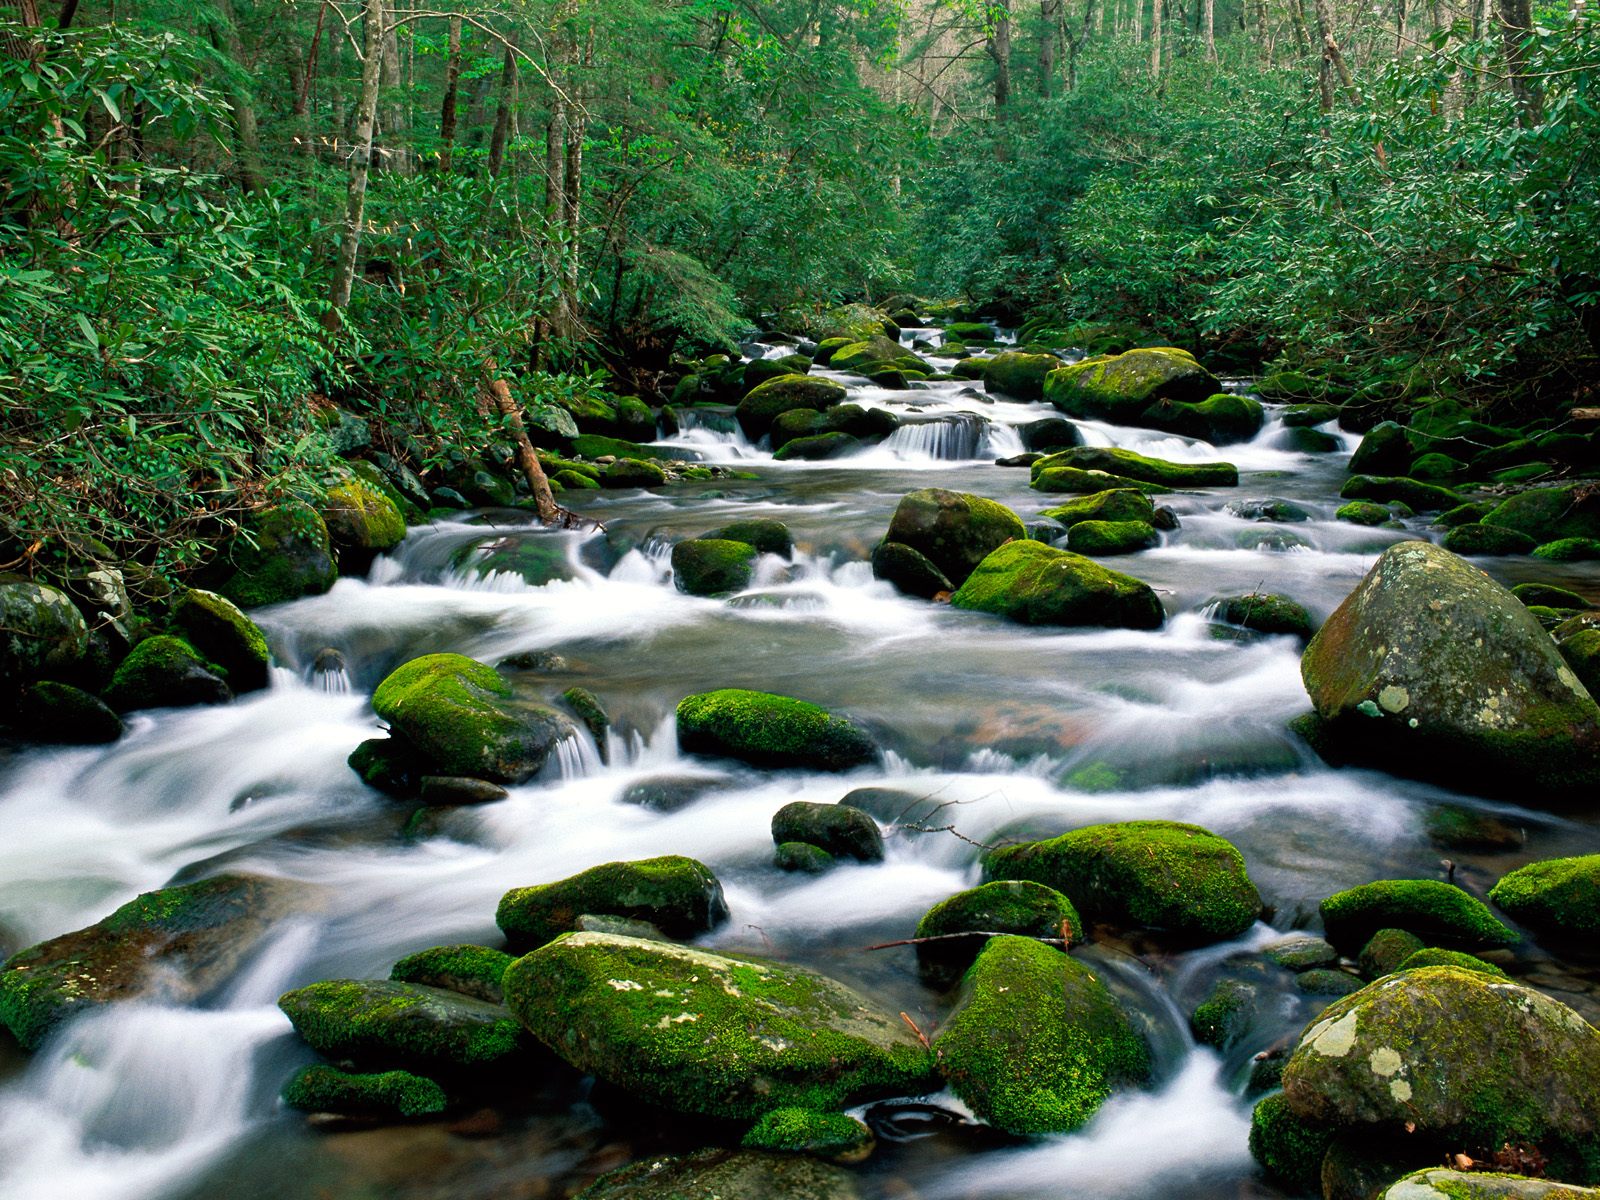  River Great Smoky Mountains Tennessee Wallpaper   Free HQ Wallpapers